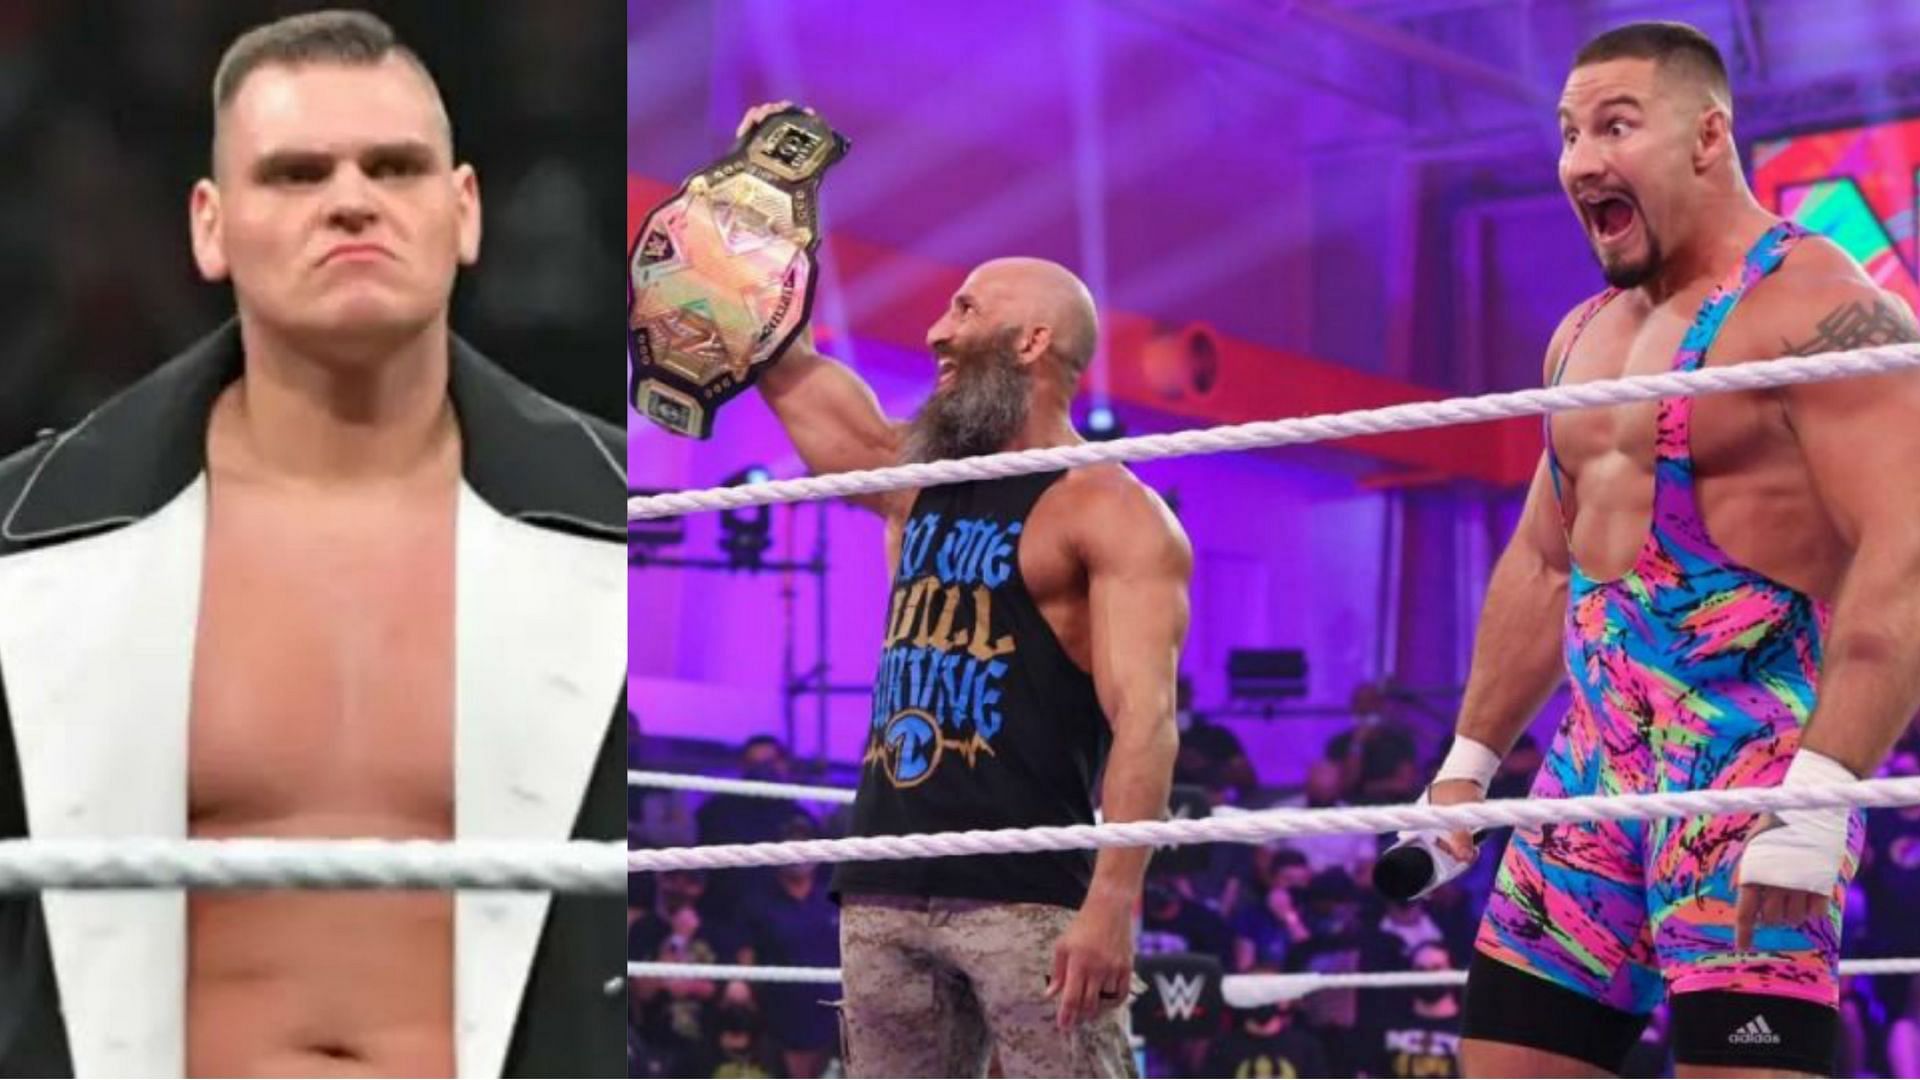 5 potential challengers for NXT Champion Tommaso Ciampa in 2022